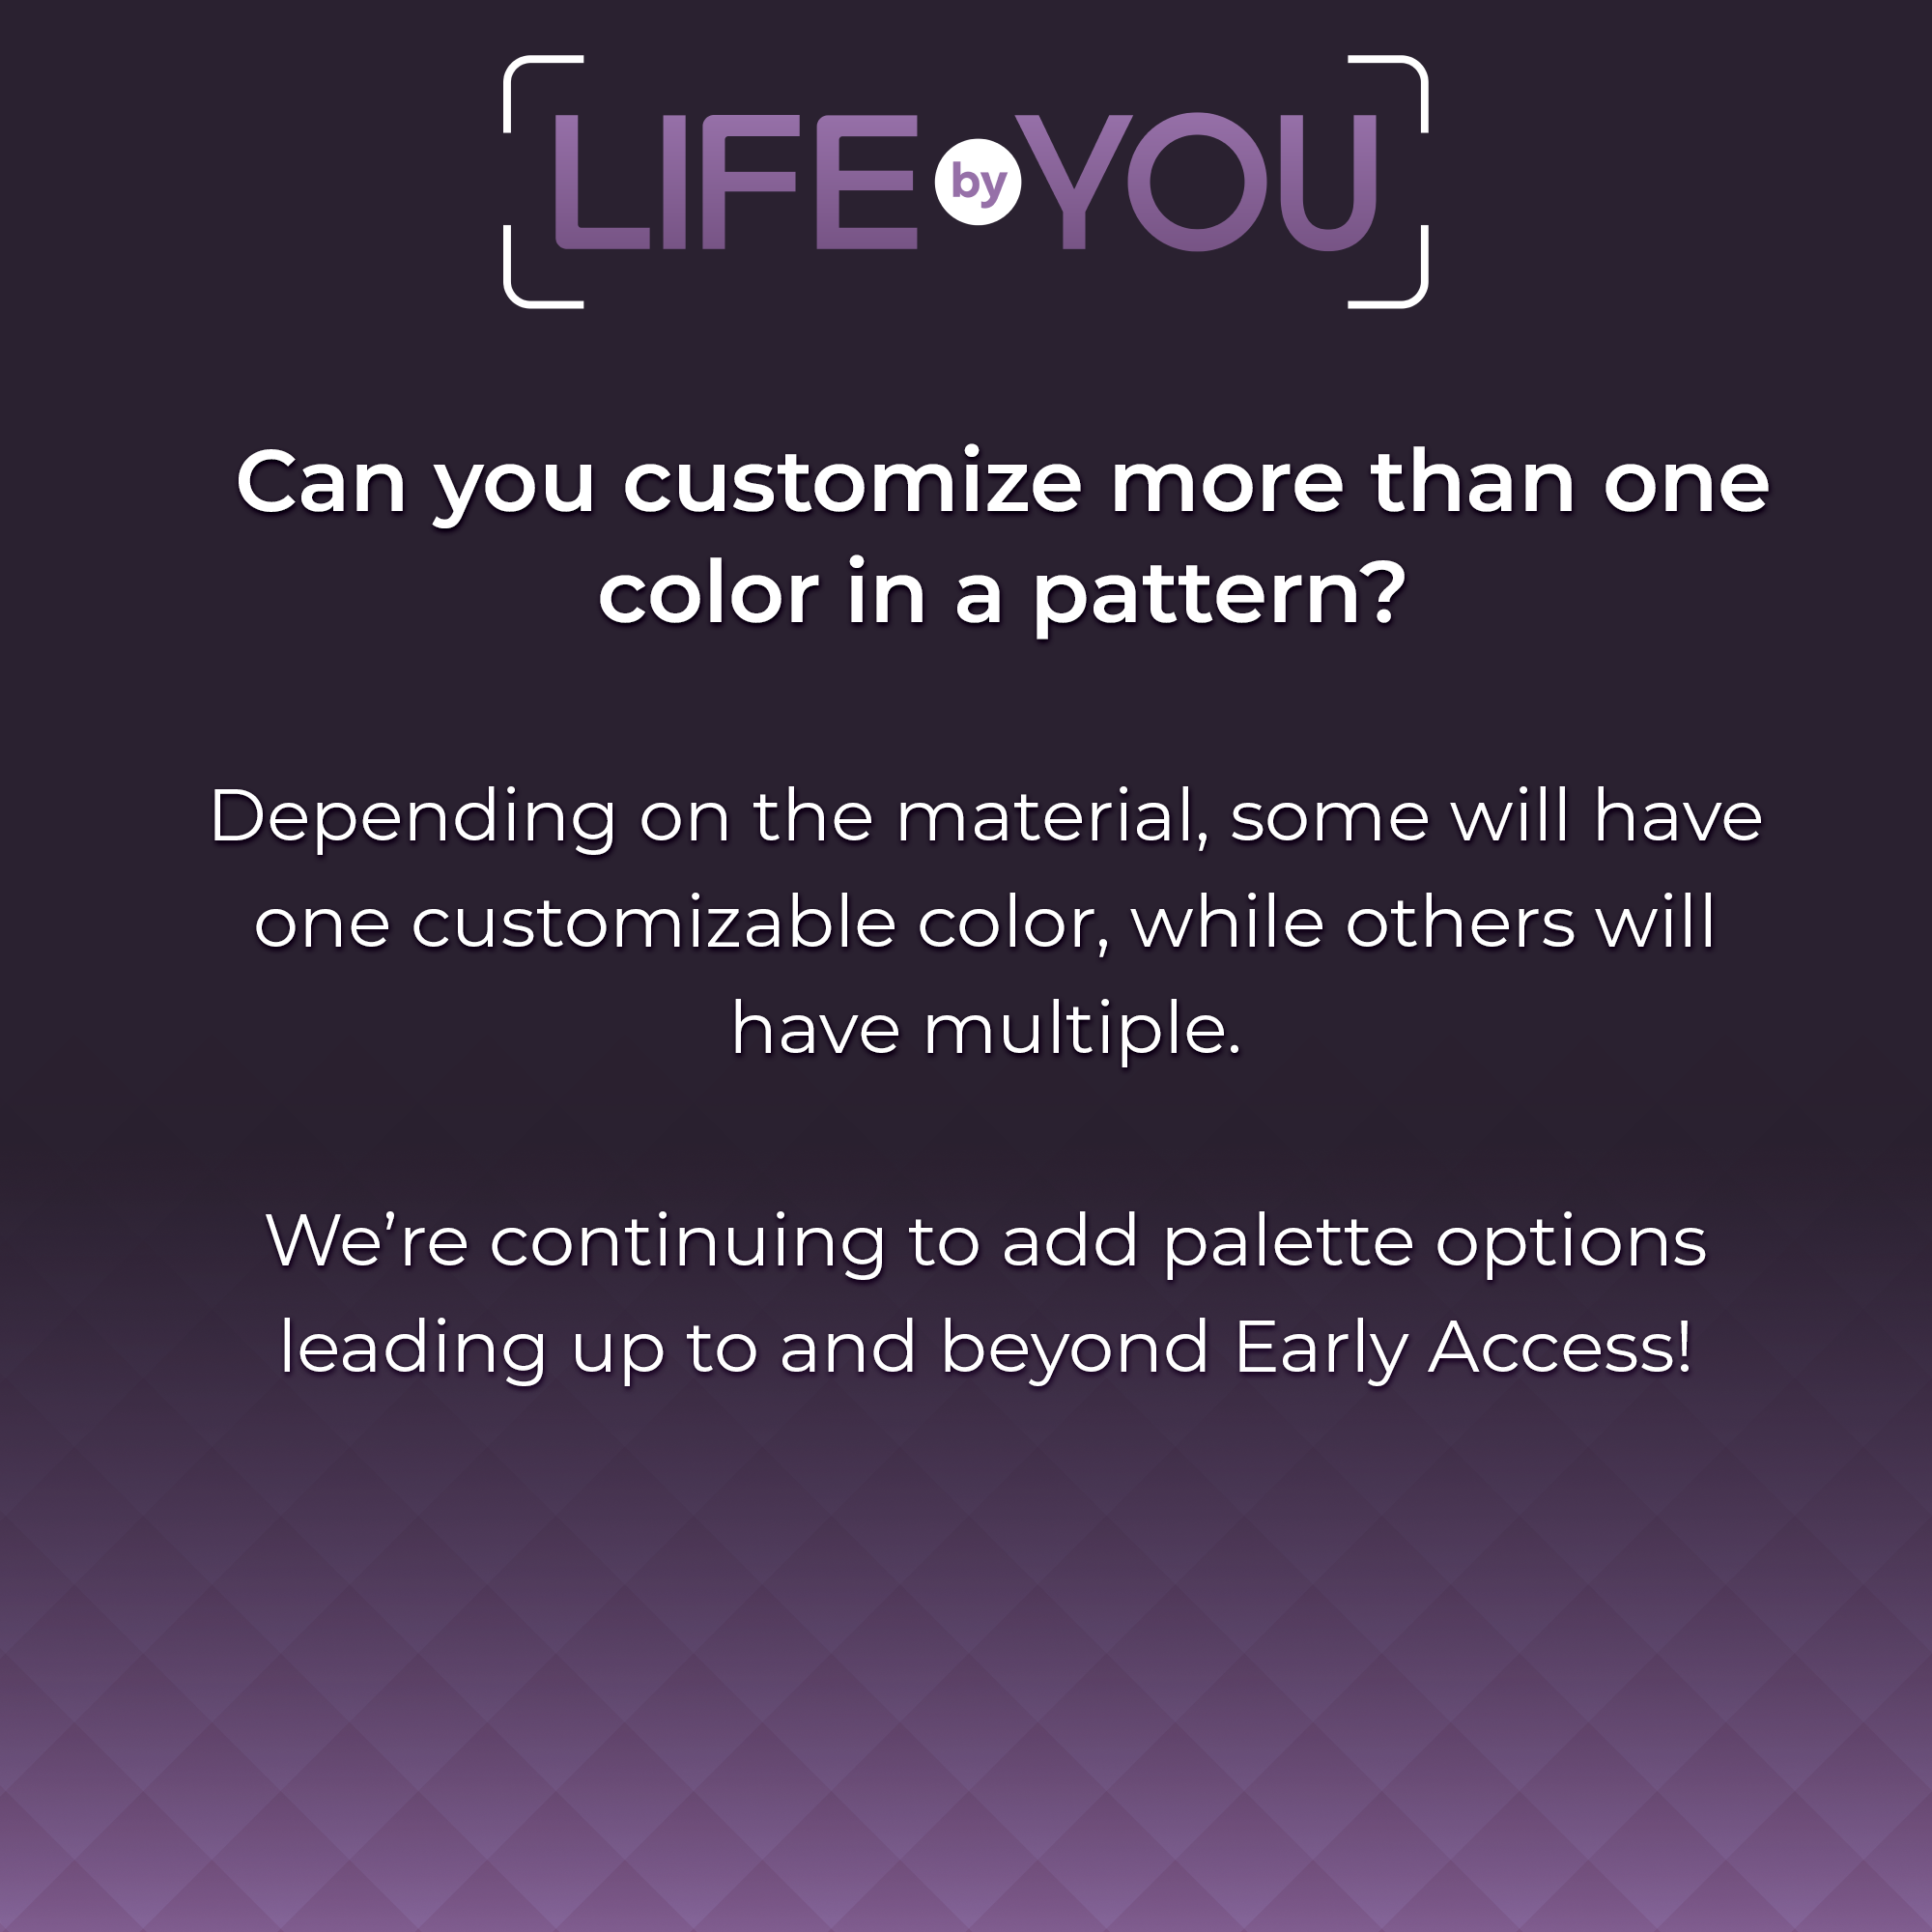 QnA Can you customize more than one color in a pattern?